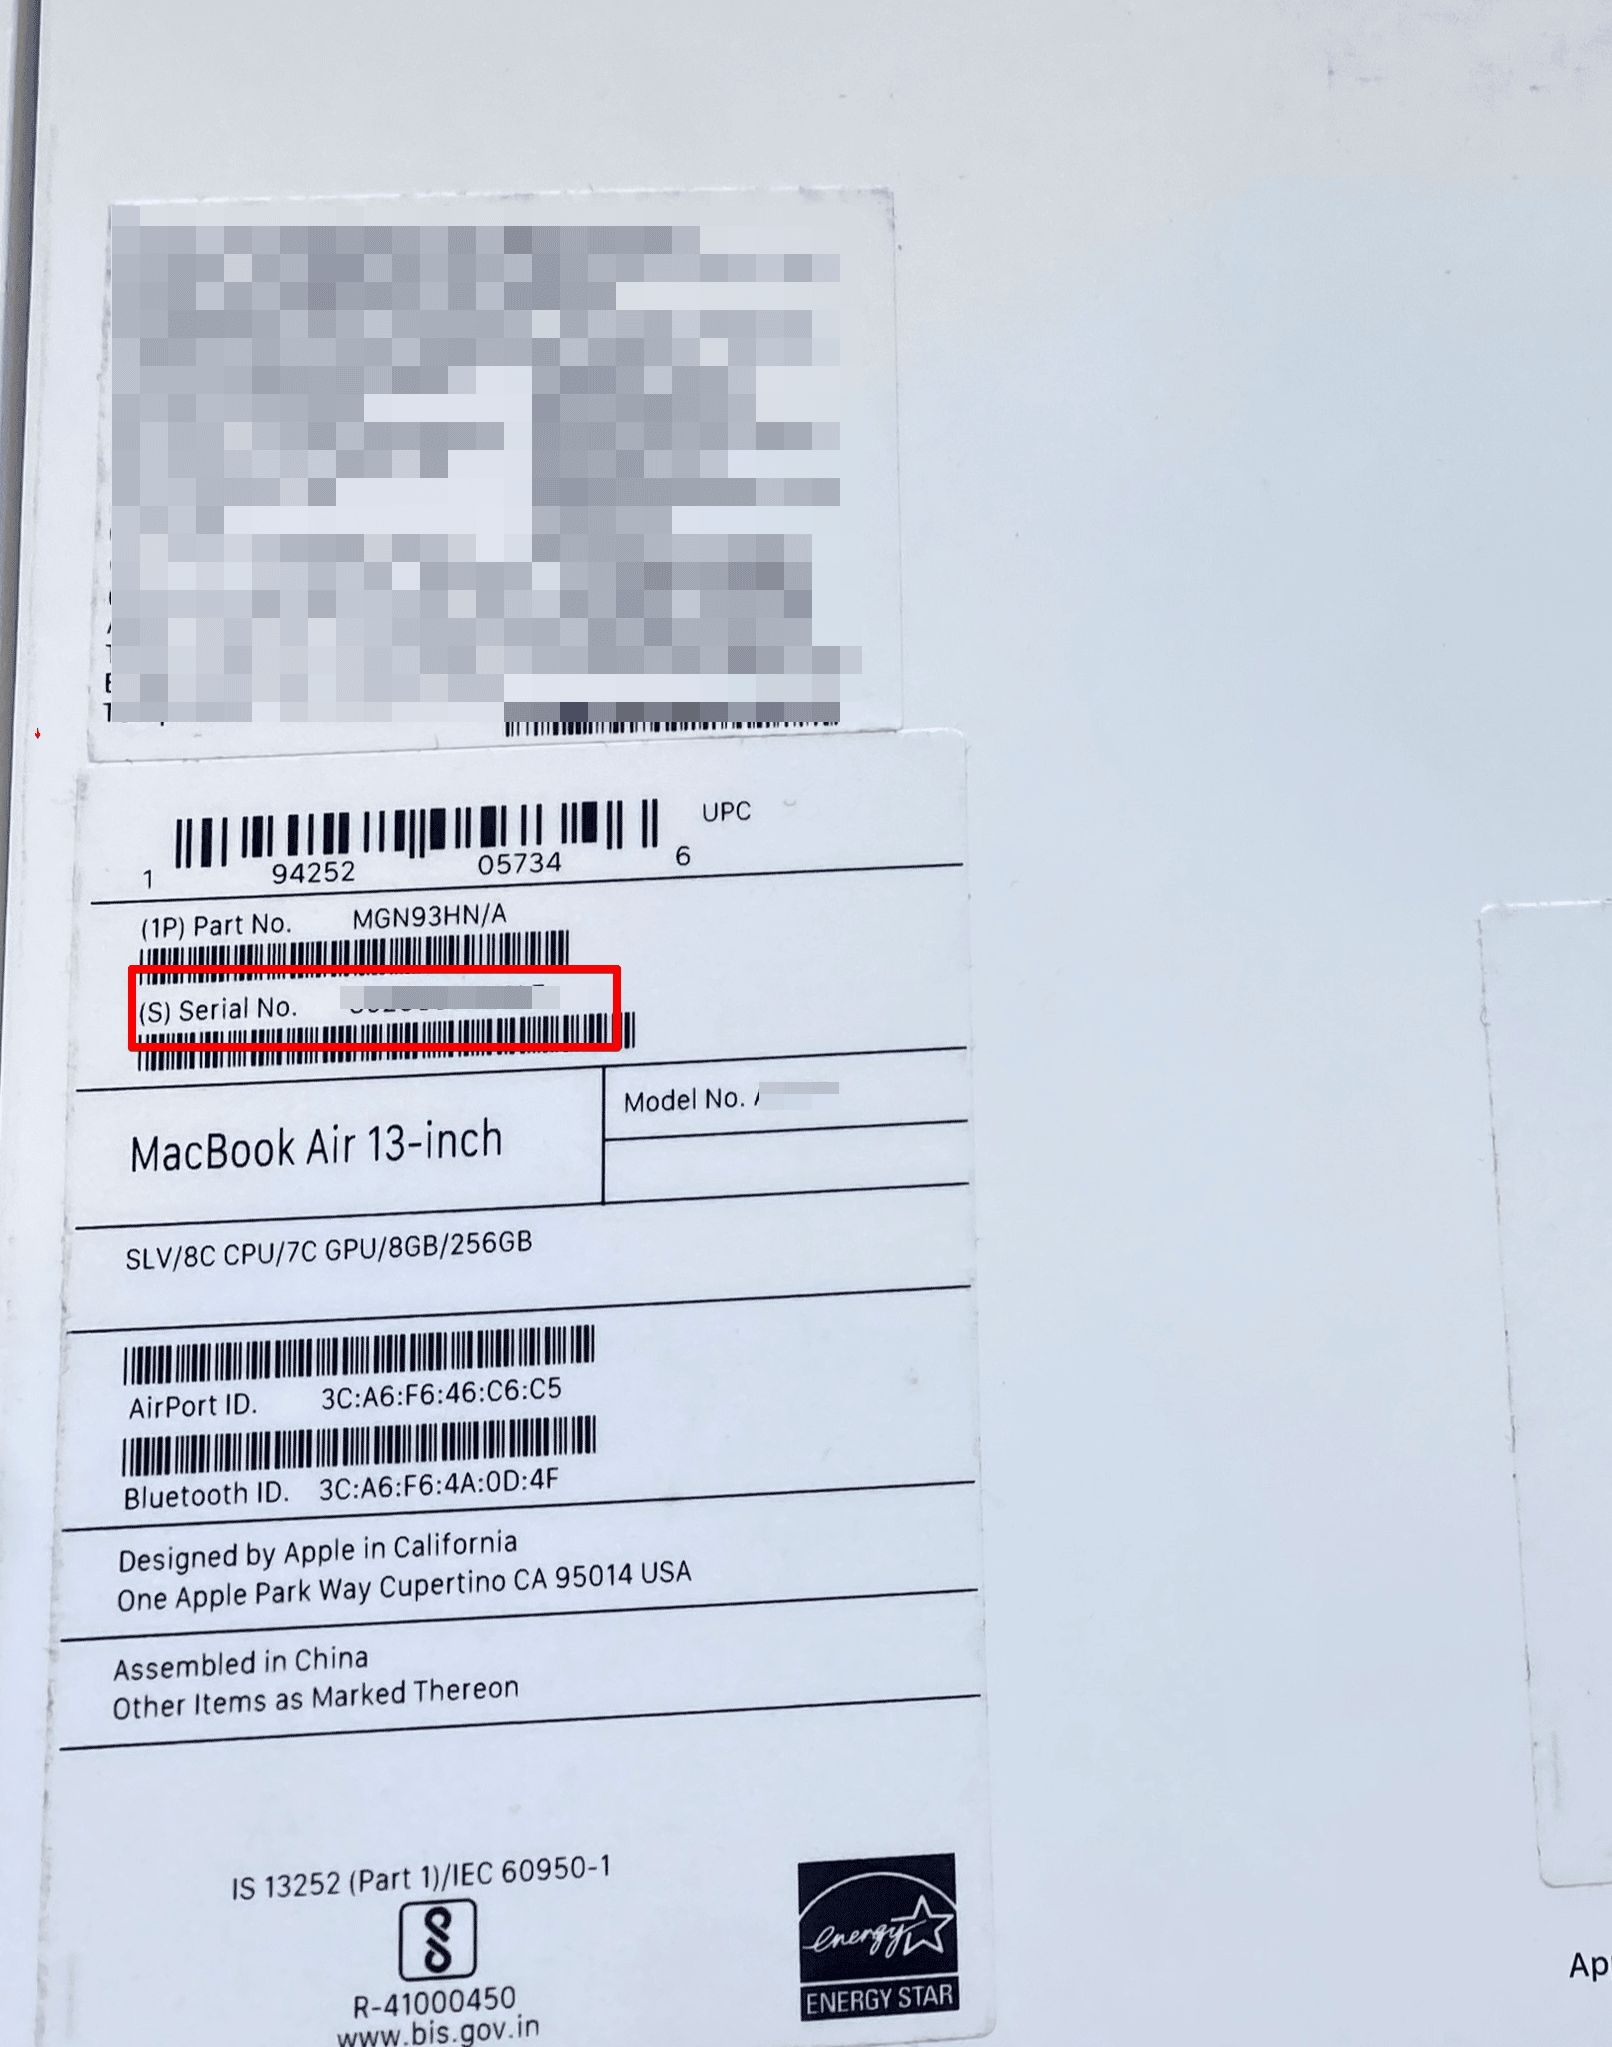 Serial number at the back of Macbook box